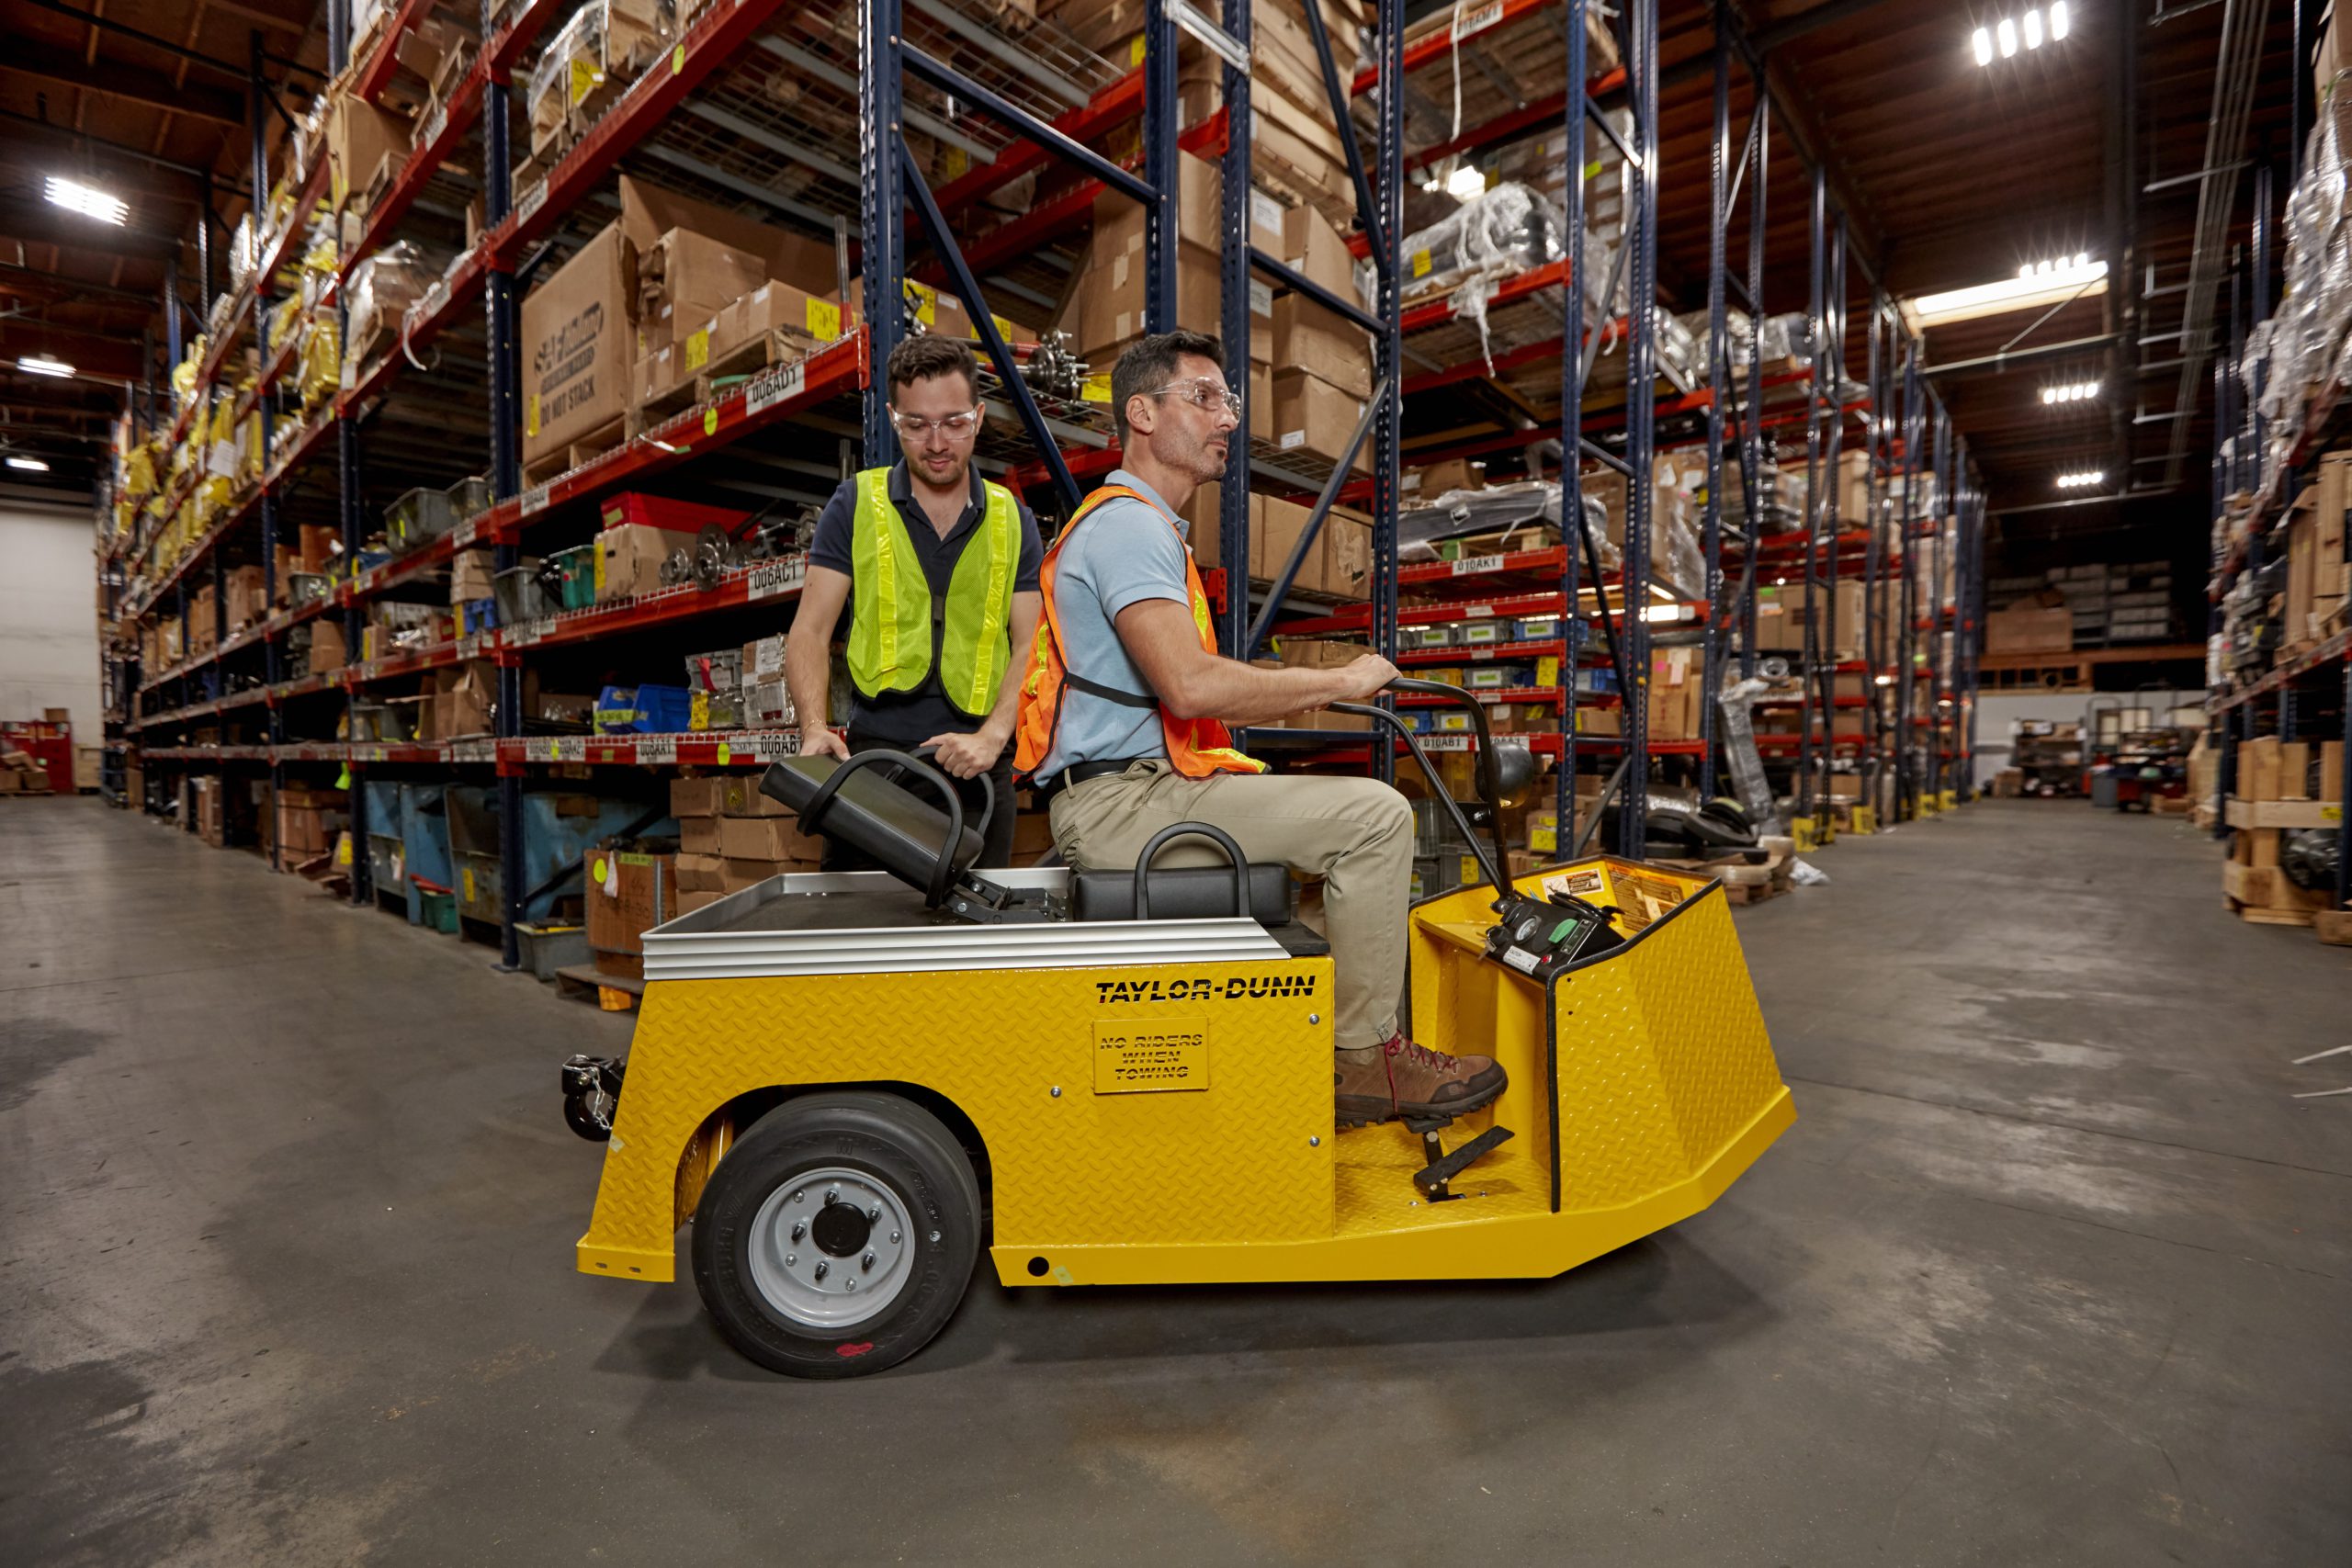 Two workers with a yellow utility vehicle in a warehouse